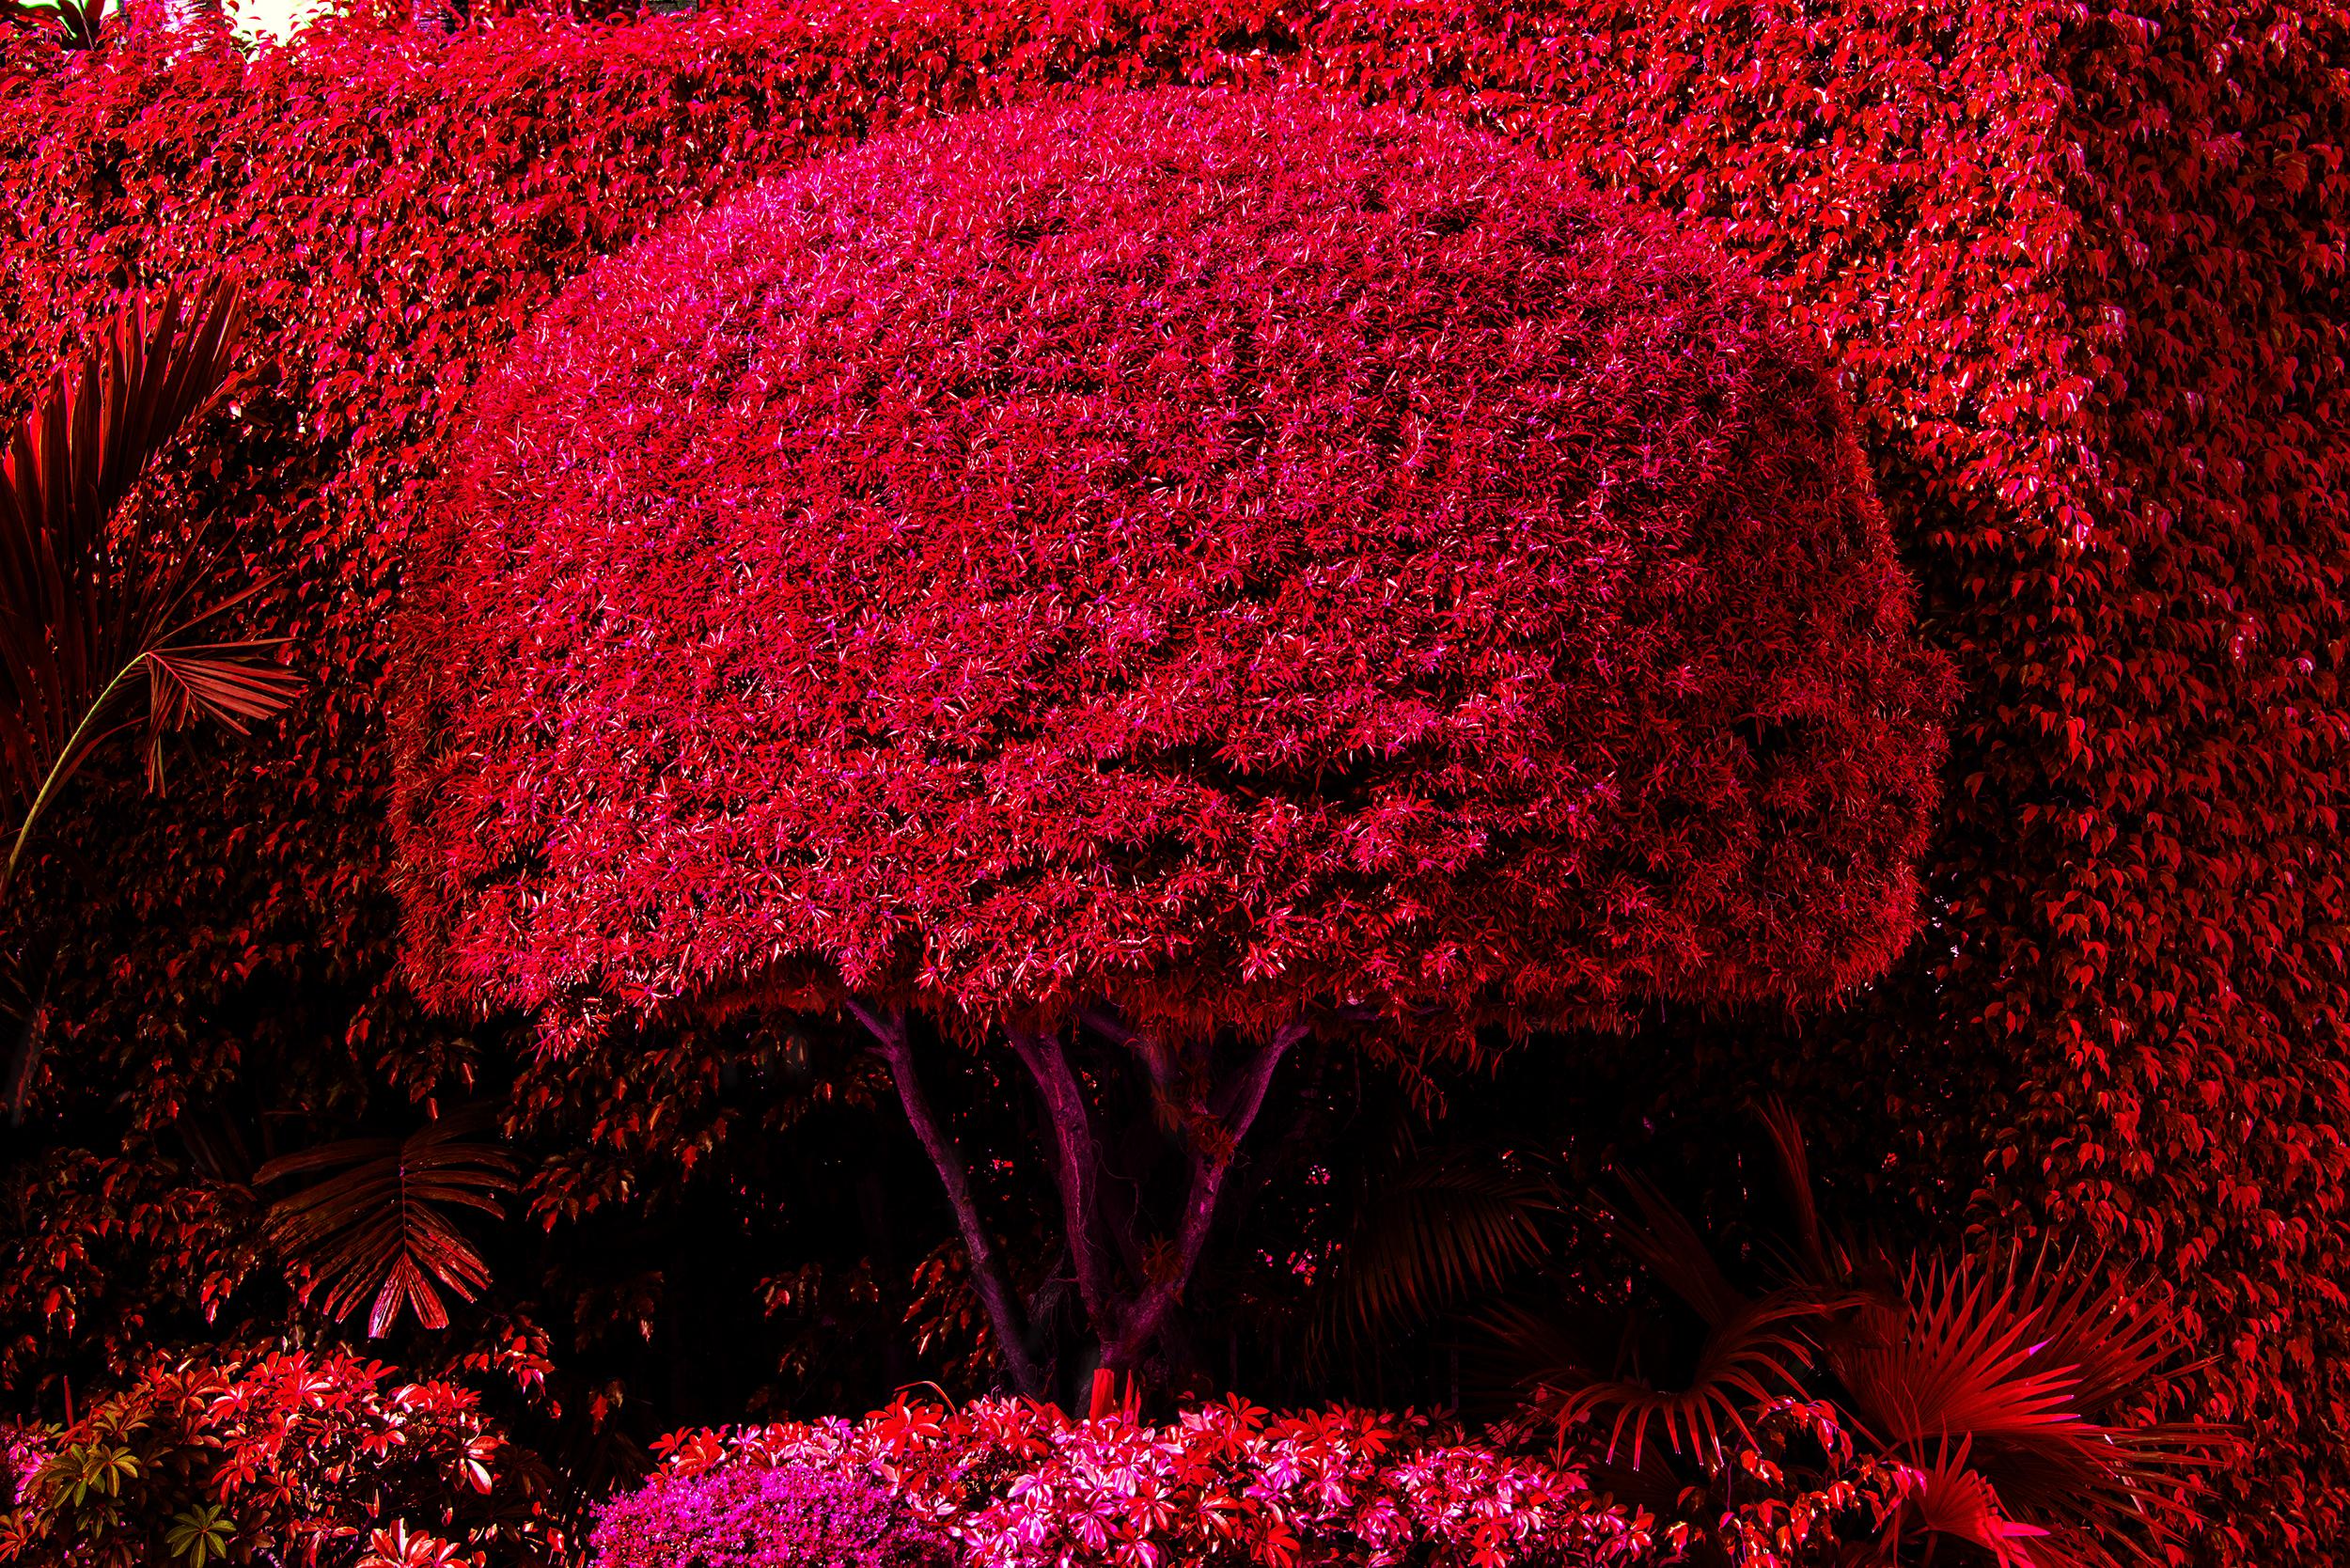 Robert Funk Landscape Photograph - Hedge Fun - Hibiscus Island - Miami Beach - Street Art from the Wealthy. Red